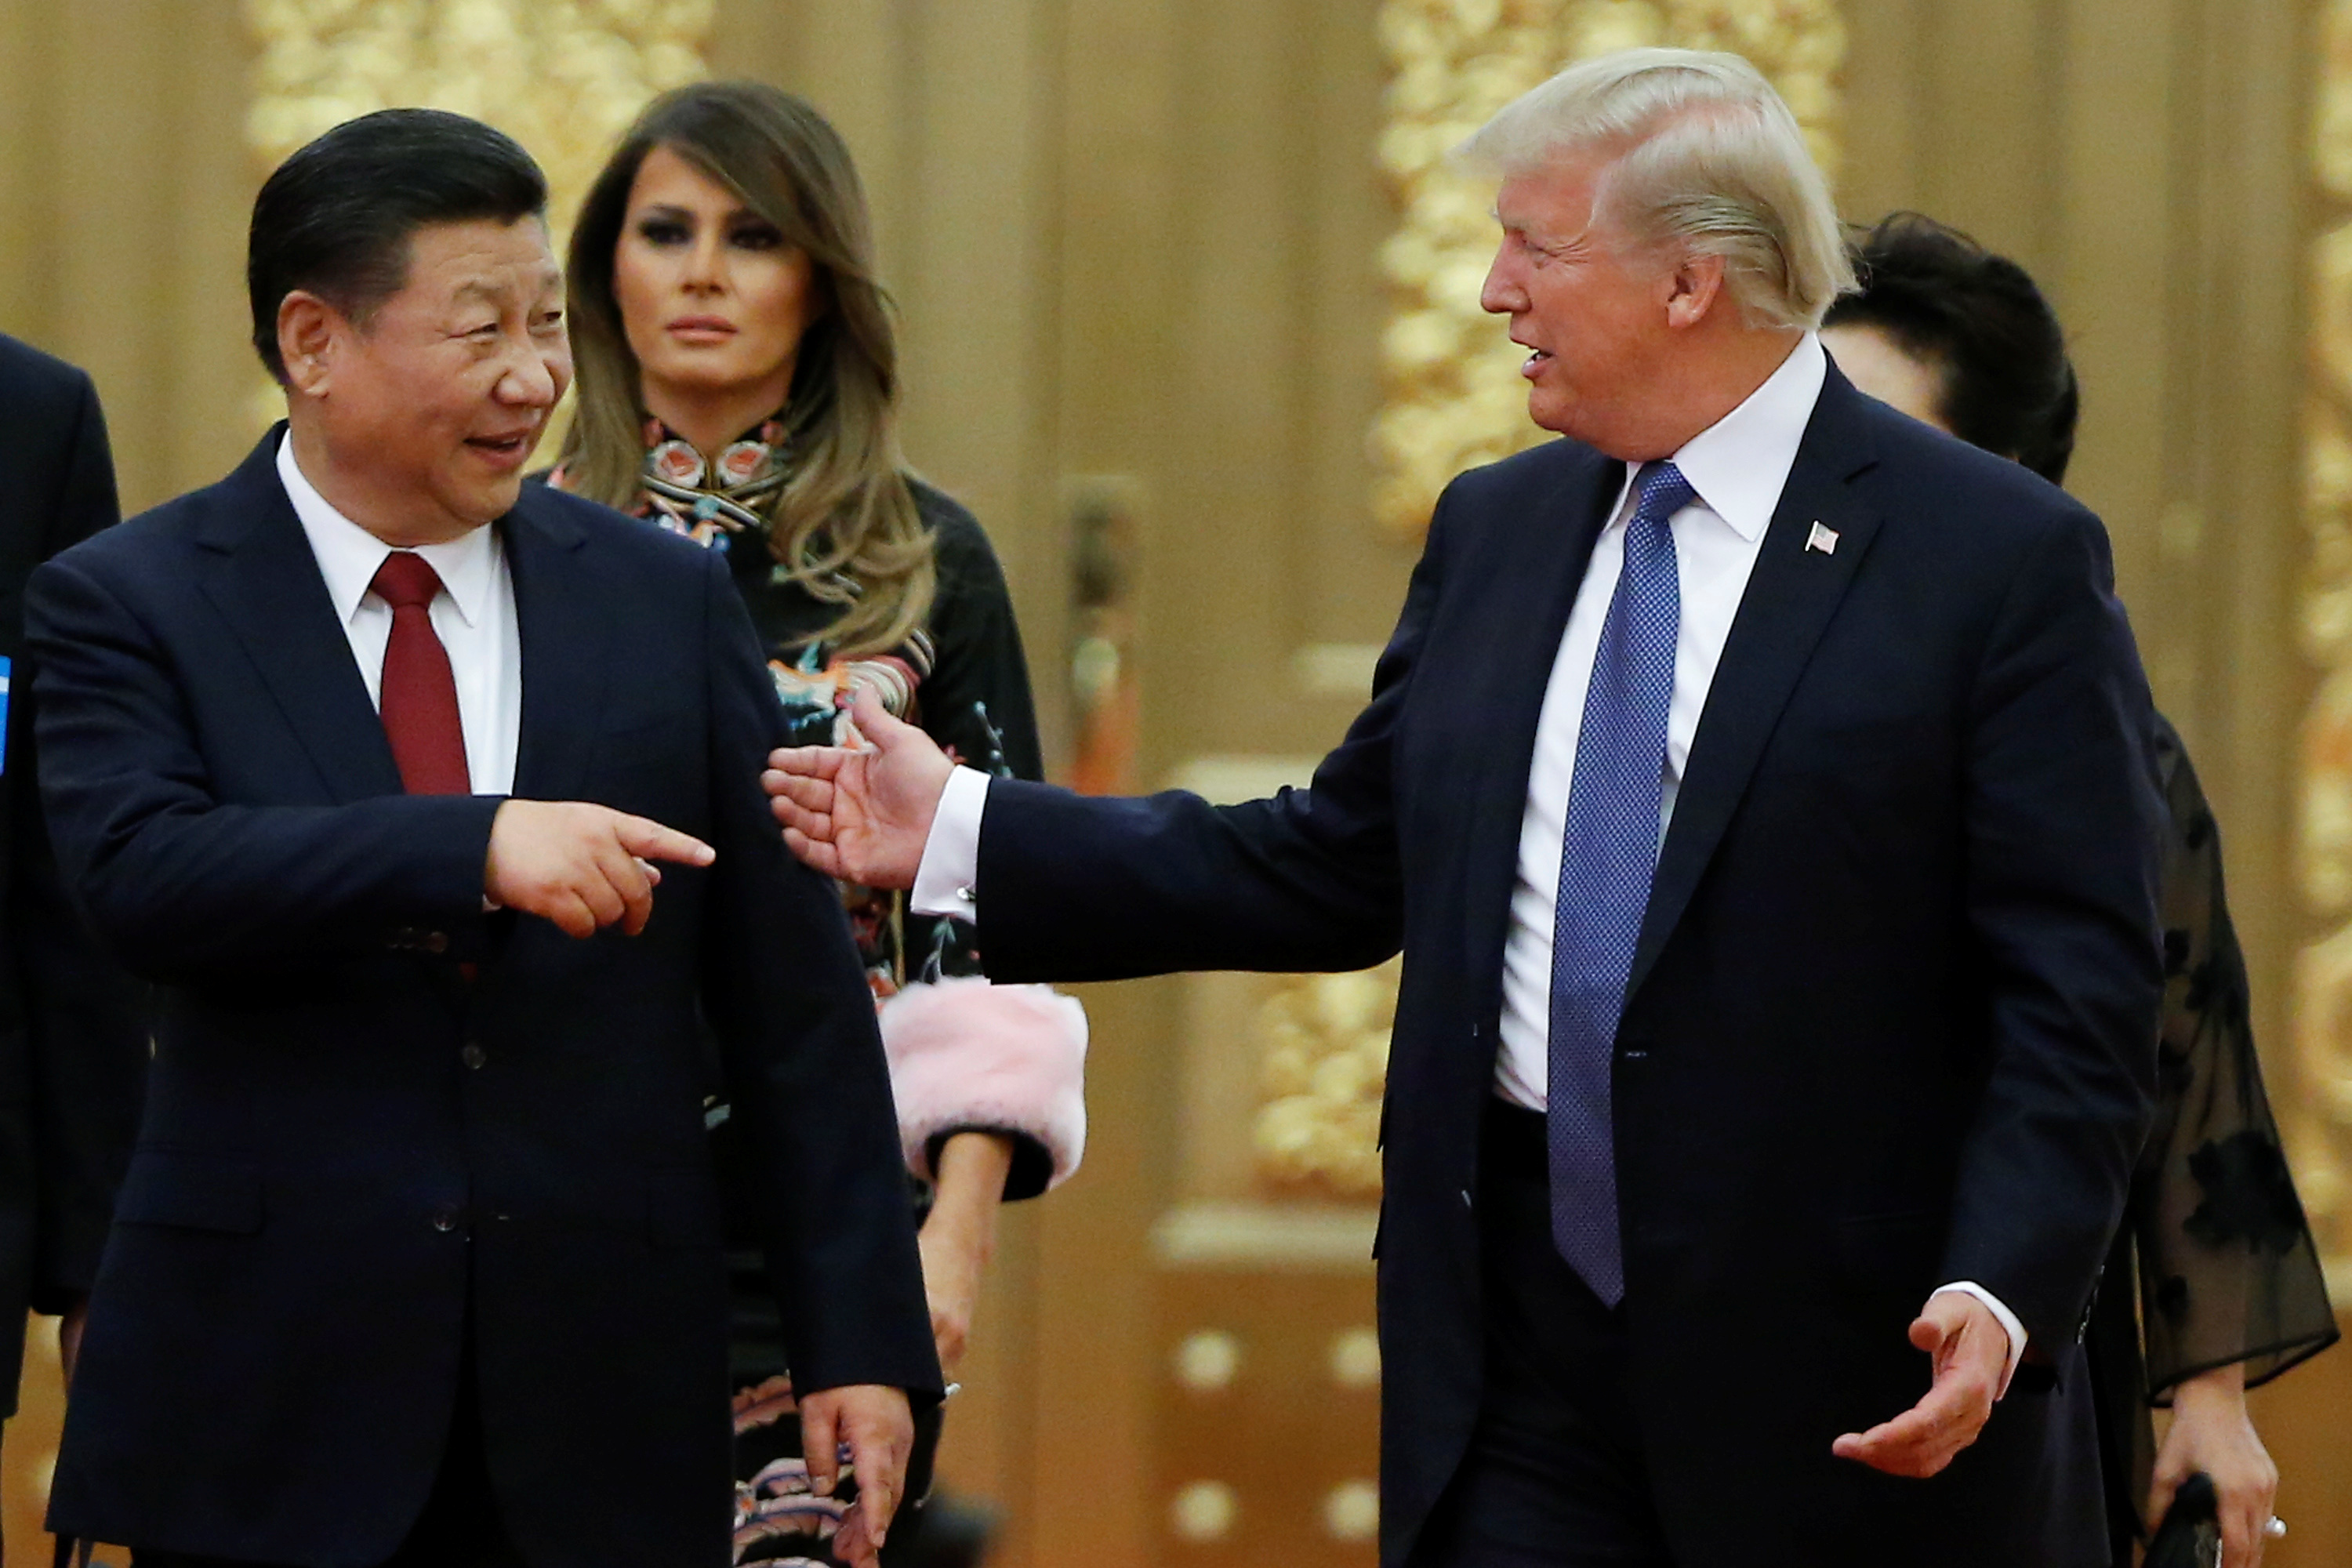 U.S. President Donald Trump and China's President Xi Jinping arrive at a state dinner at the Great Hall of the People in Beijing, China, November 9, 2017. REUTERS/Thomas Peter